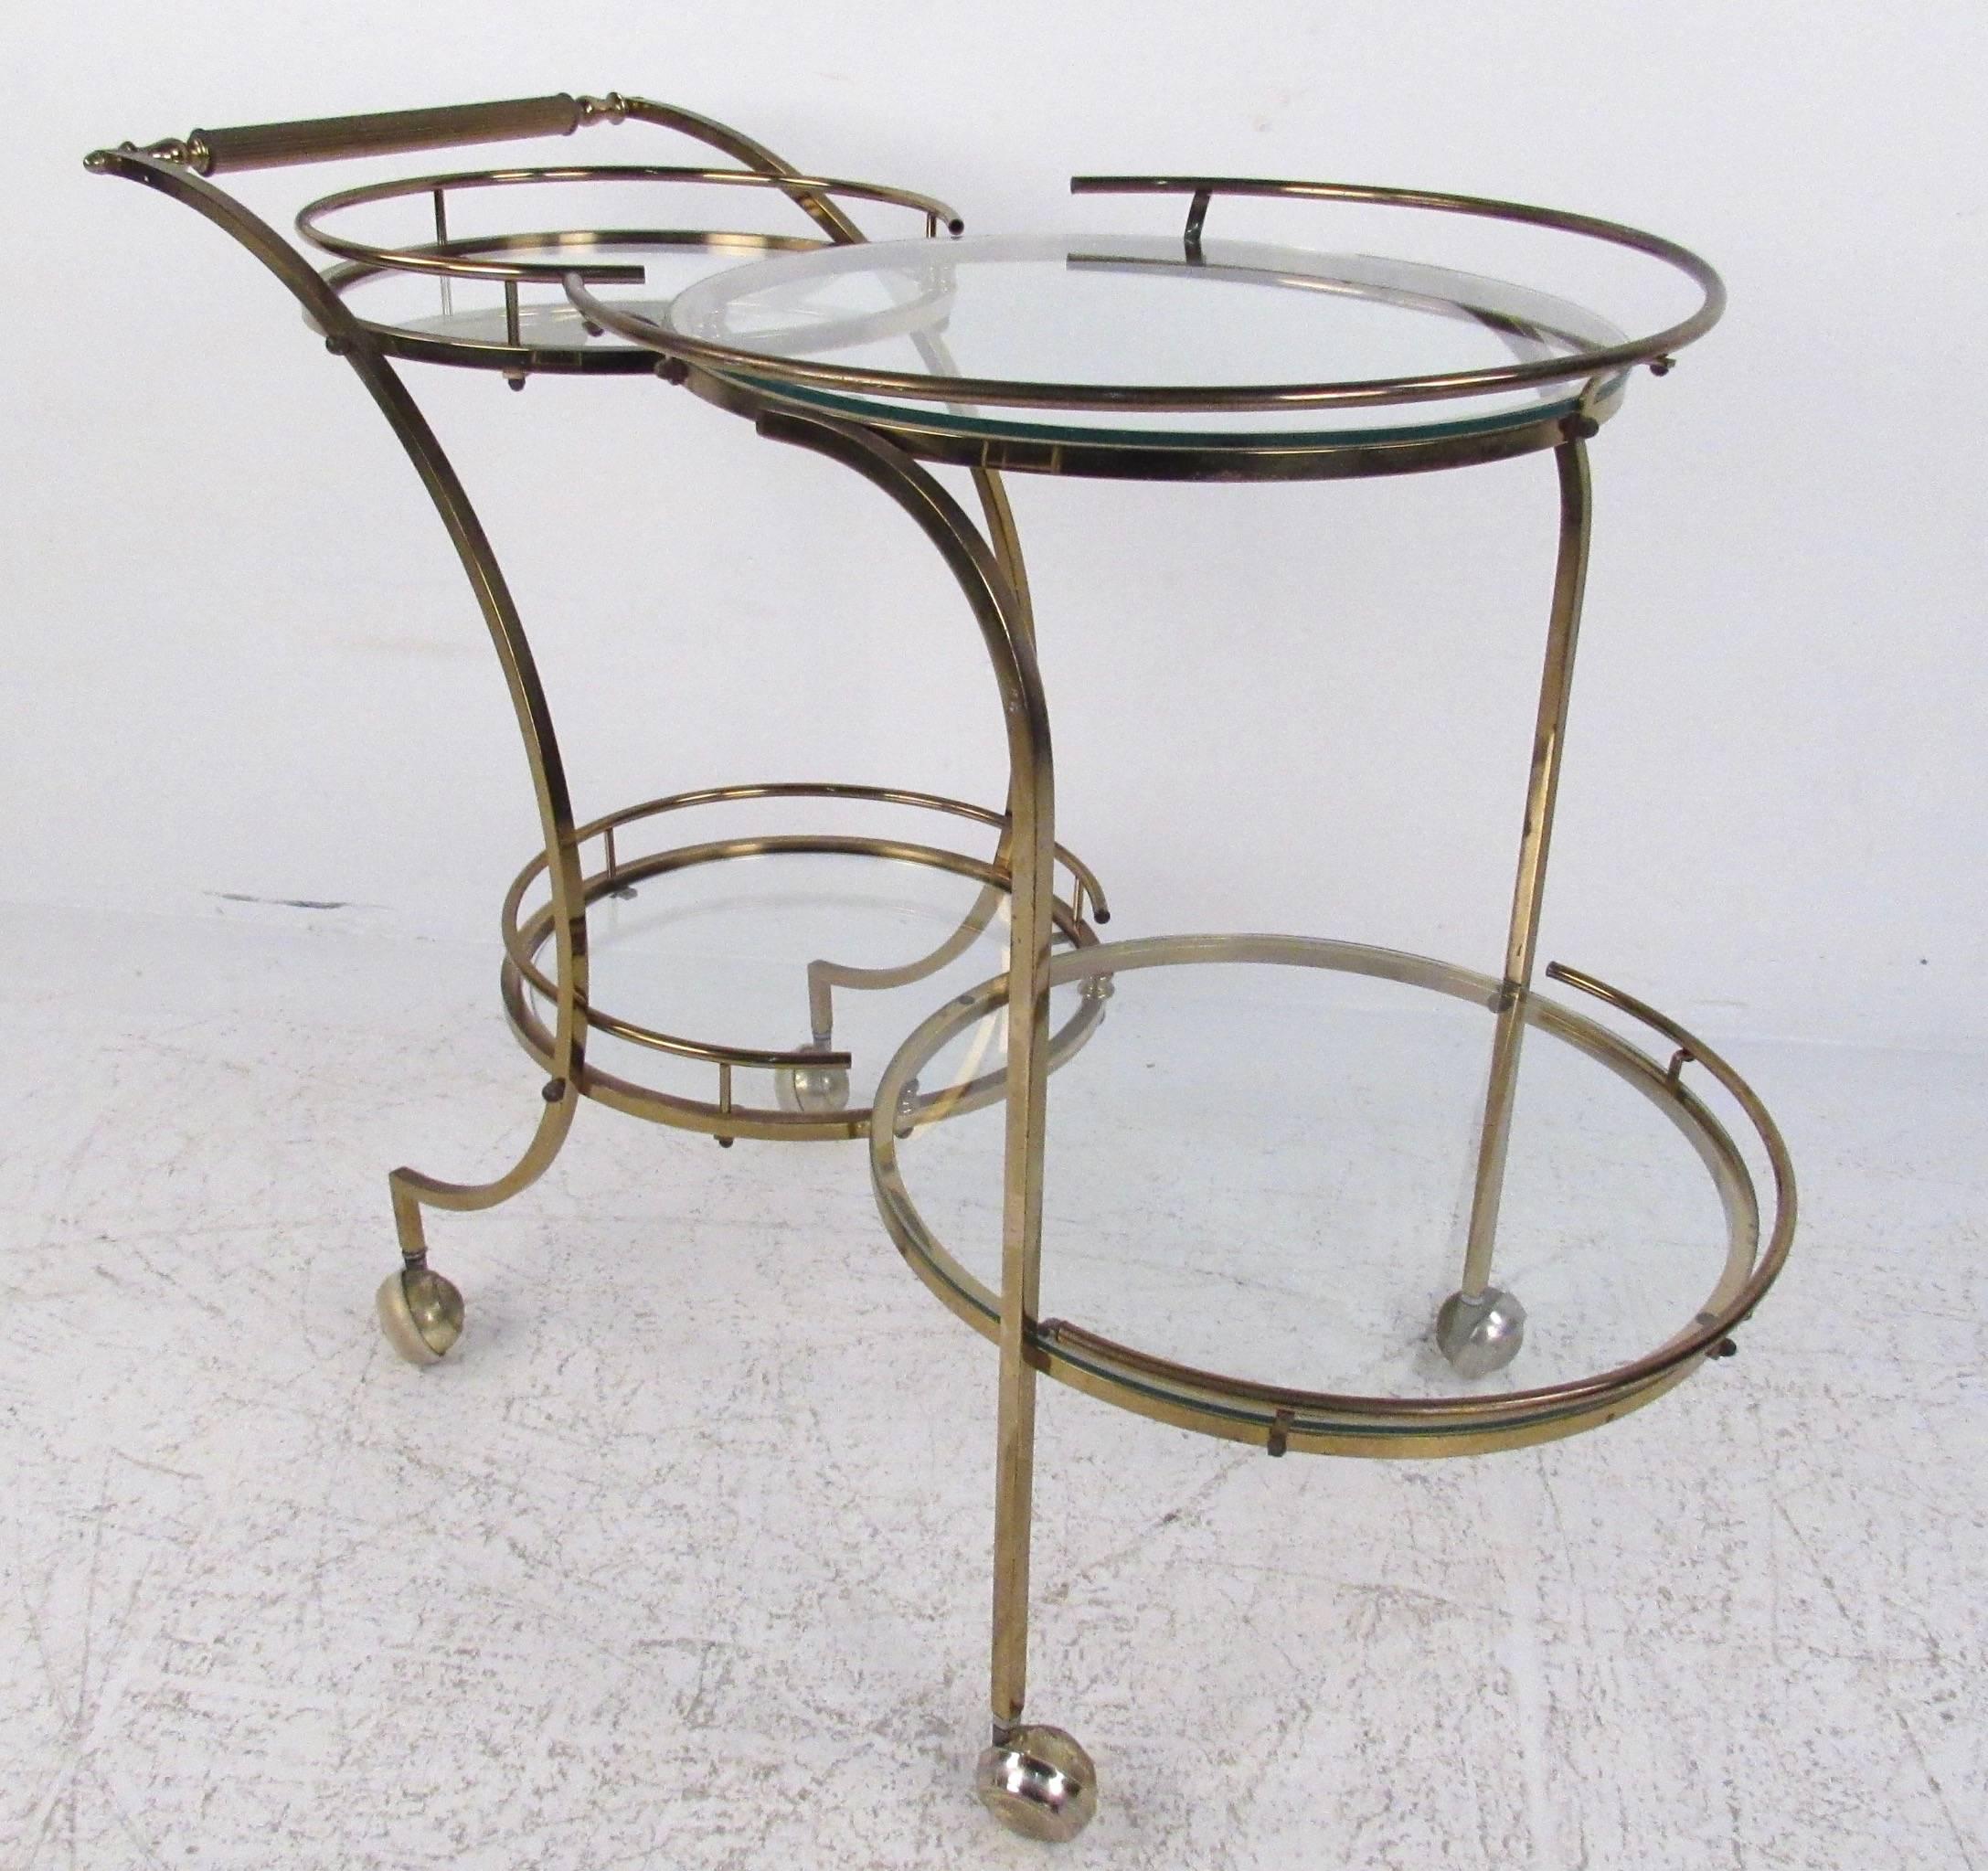 This vintage Italian brass bar cart features elegant lines and four tier circular shelves for storage and service. Stylish Mid-Century serving cart boasts slender elegant frame and hardwood handle, making a versatile and beautiful addition to any